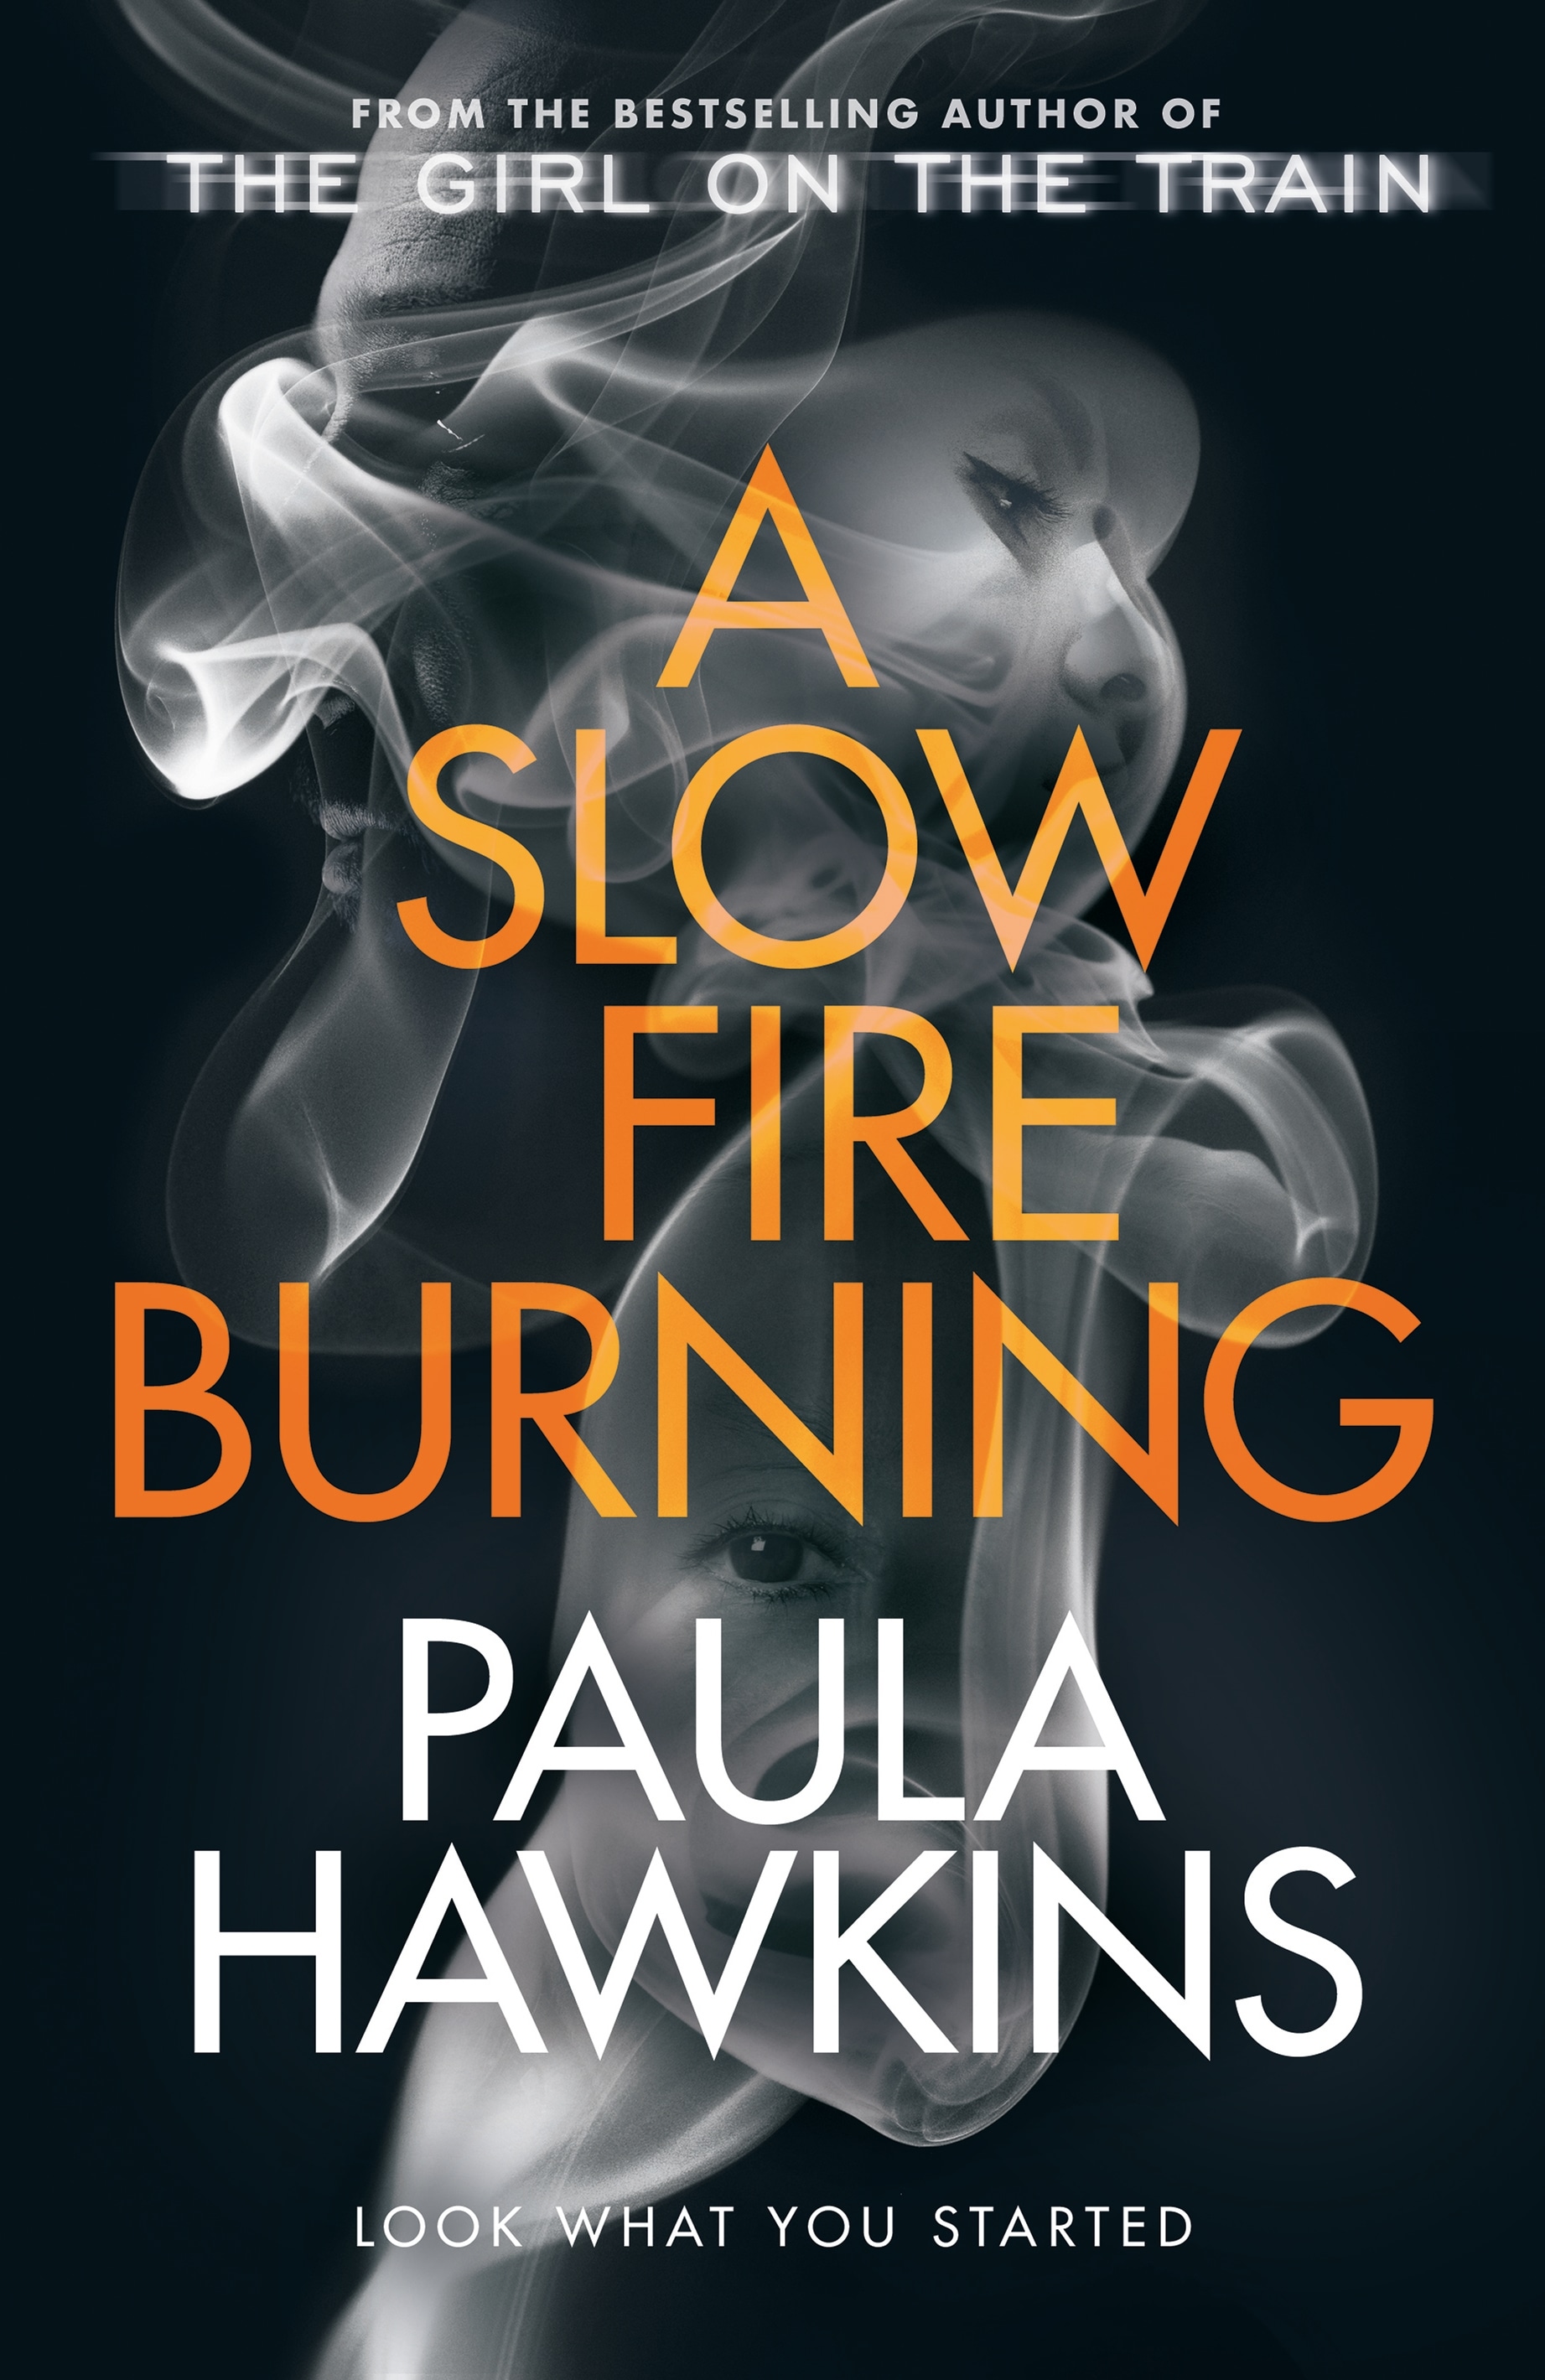 Book “A Slow Fire Burning” by Paula Hawkins — August 31, 2021